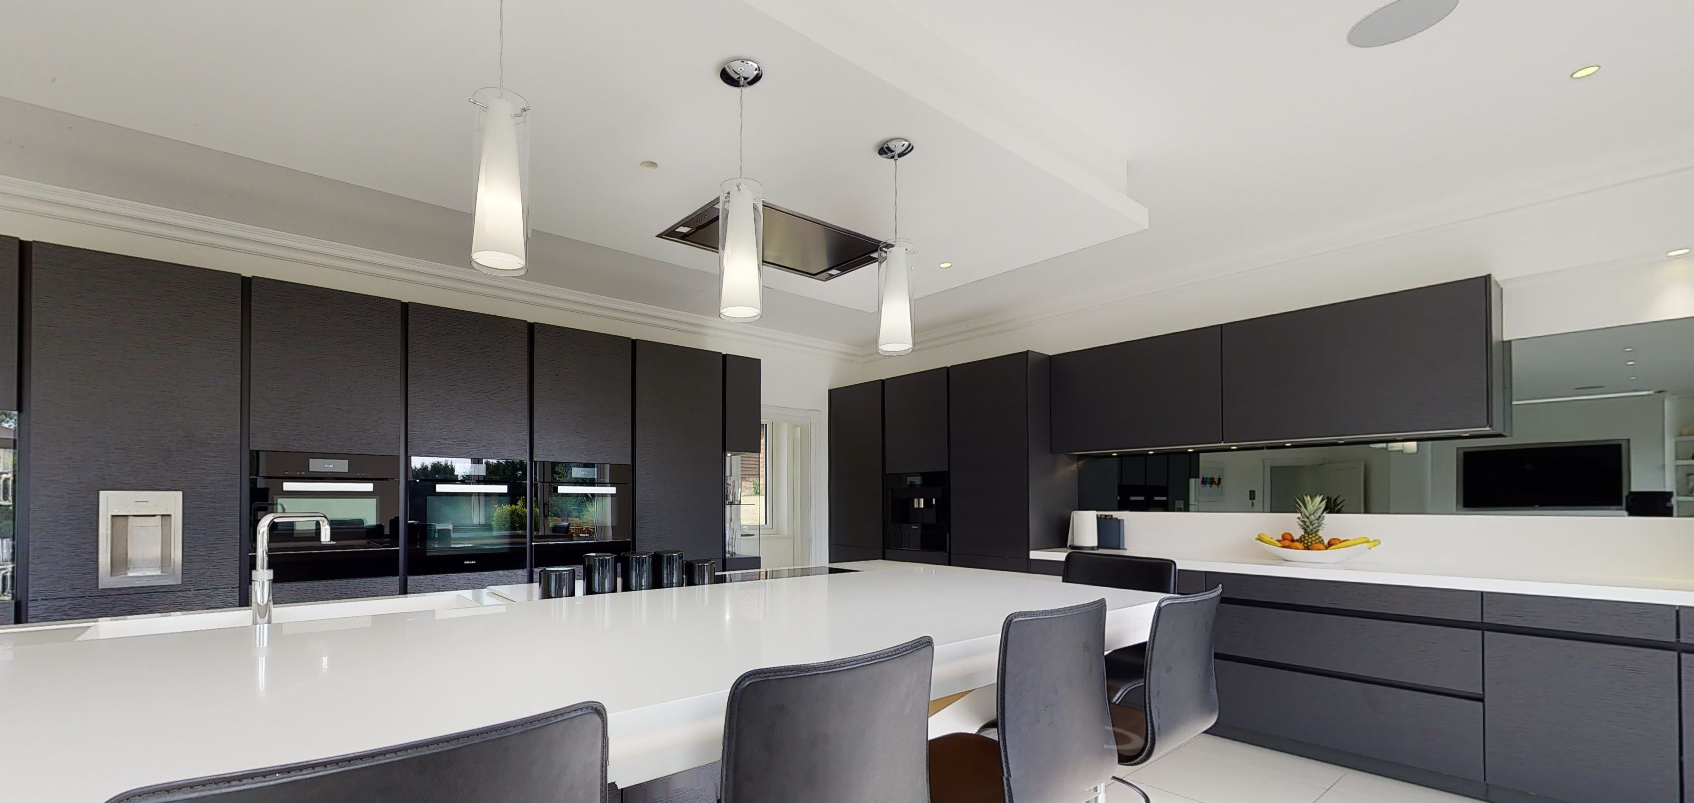 In-ceiling loudspeakers in the kitchen provide the audio.